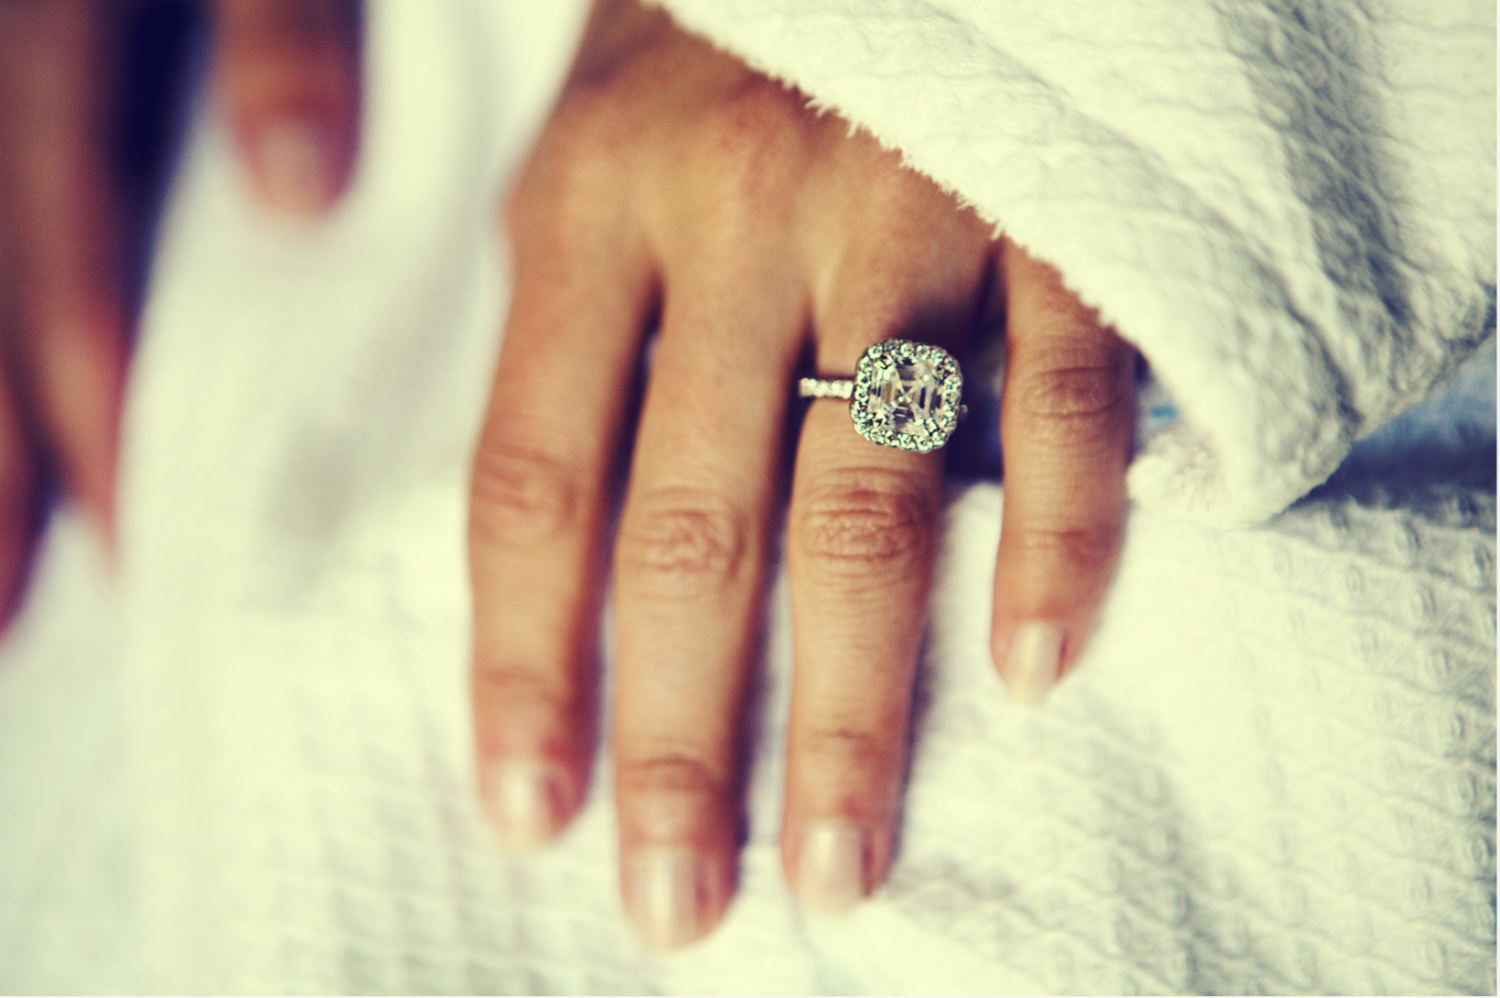 Choosing the Right Engagement Ring